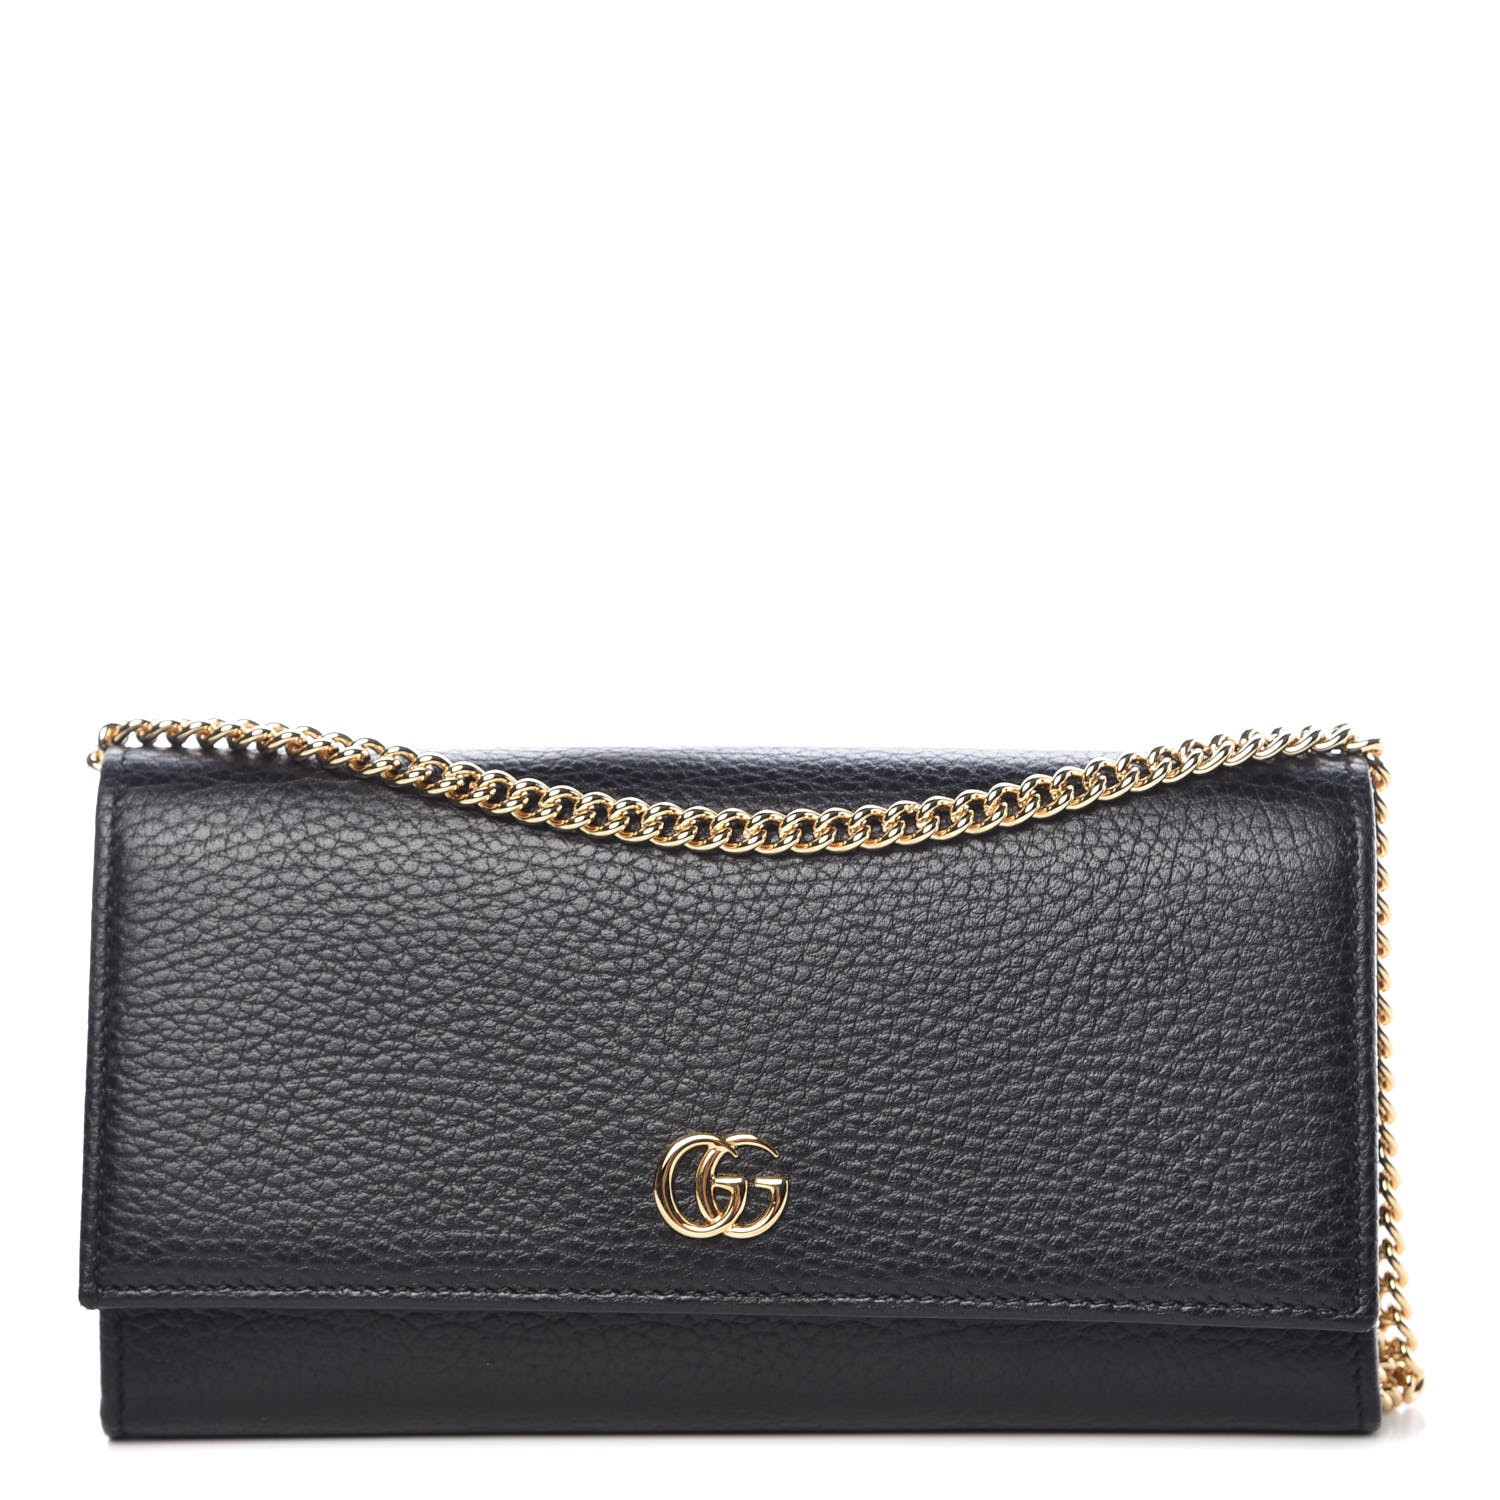 gucci petite gg marmont leather flap wallet on a chain